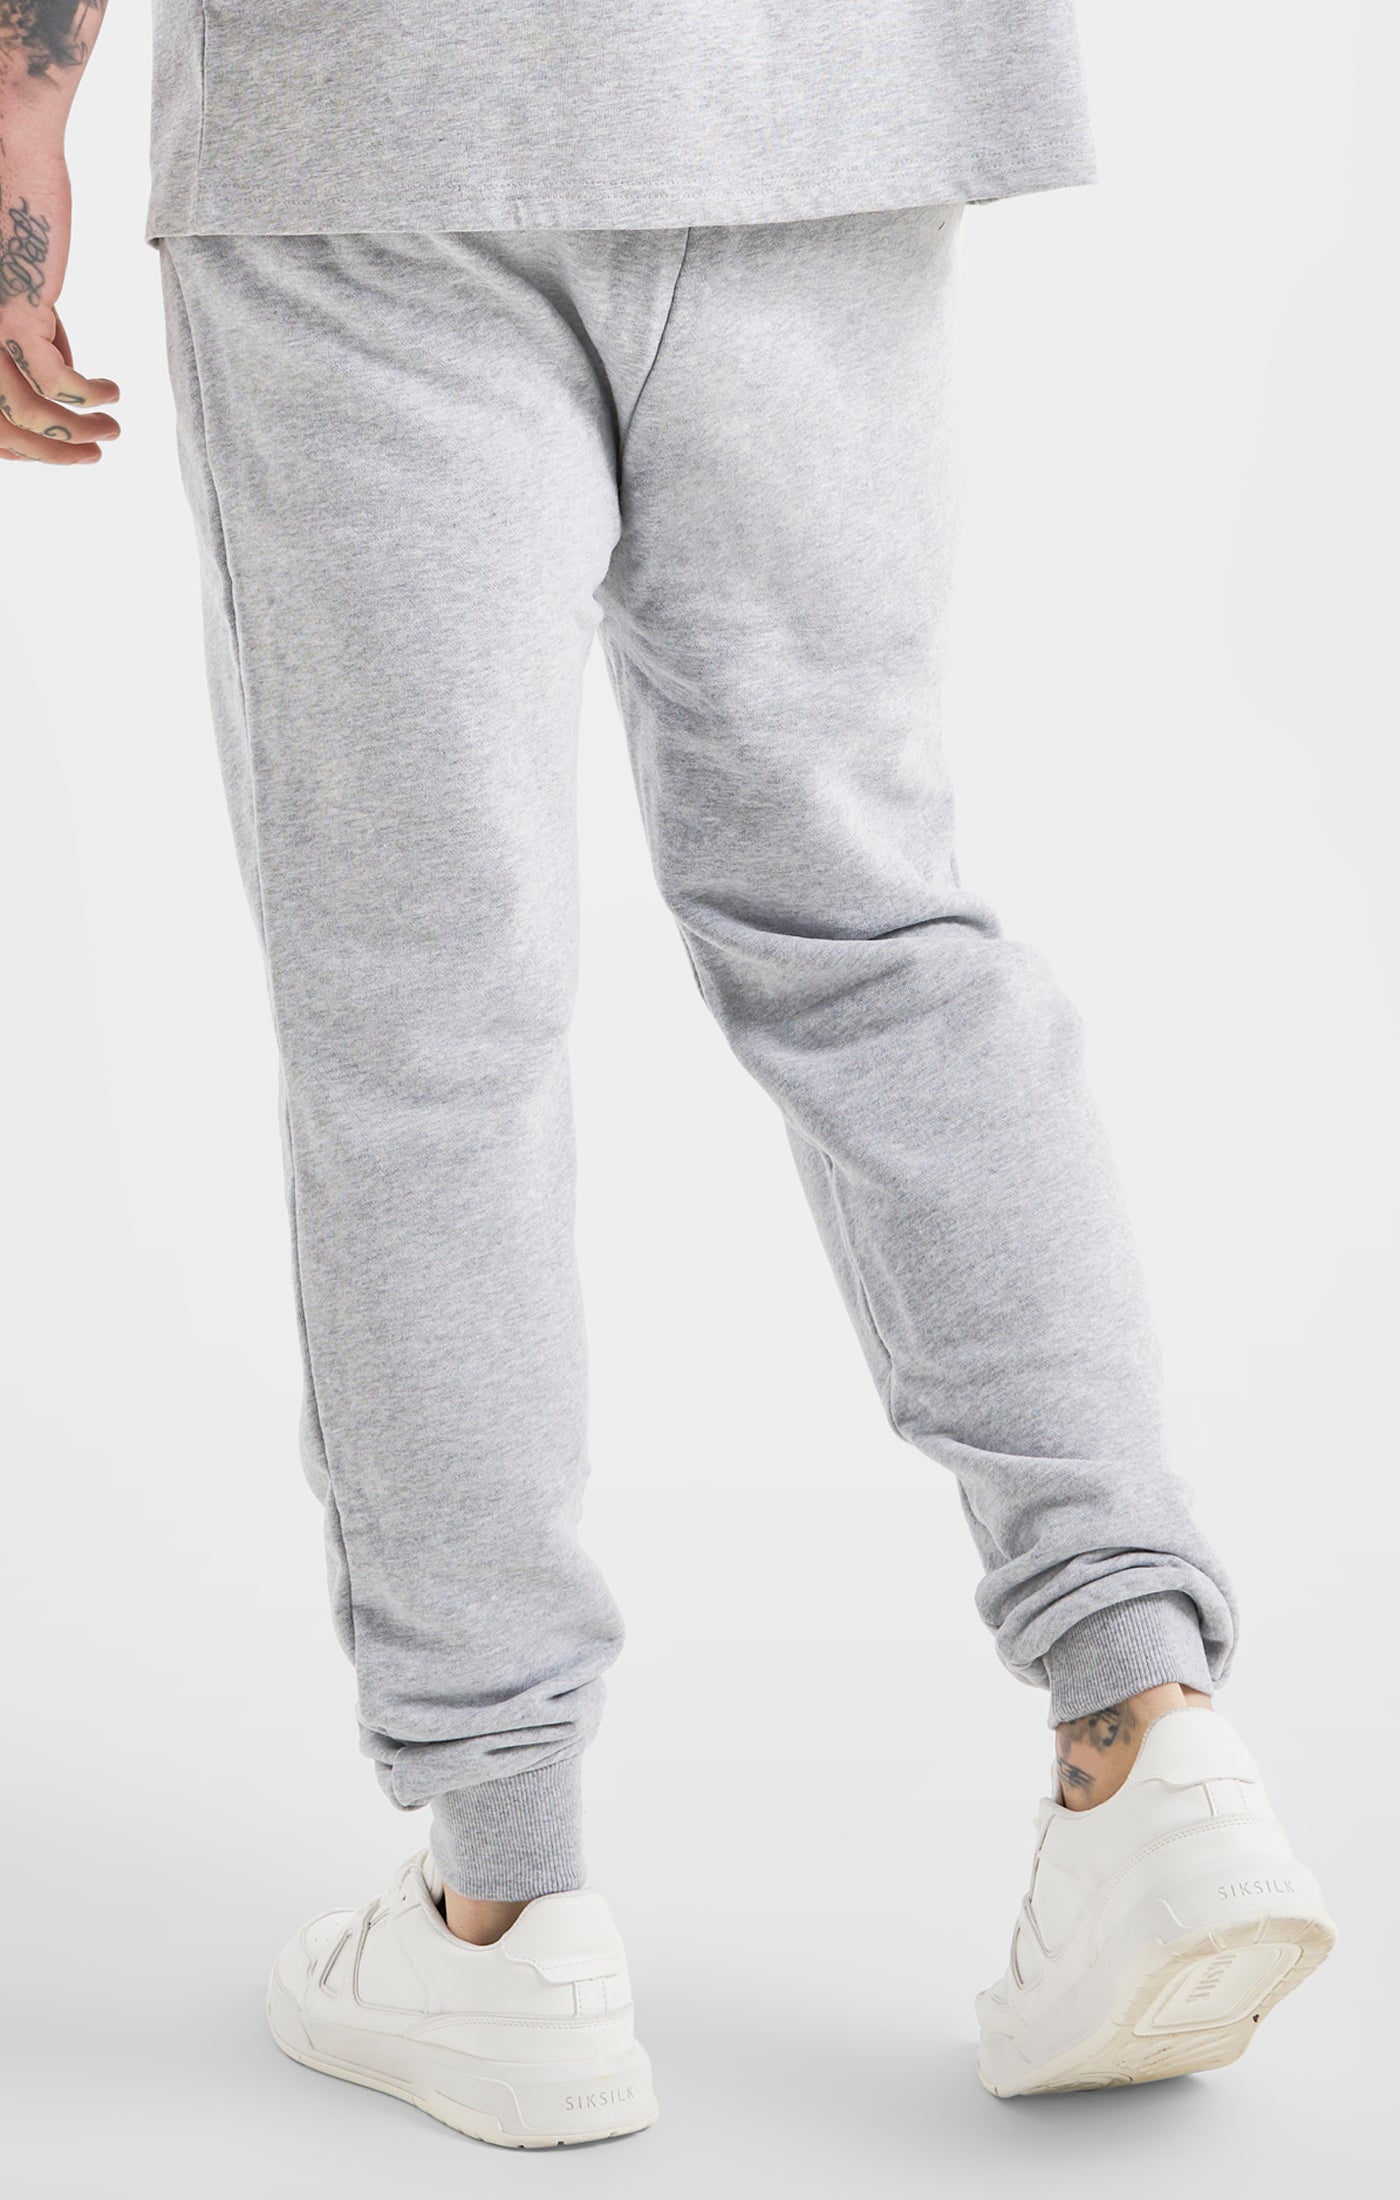 Load image into Gallery viewer, Messi x SikSilk Grey Fleece Pant (3)